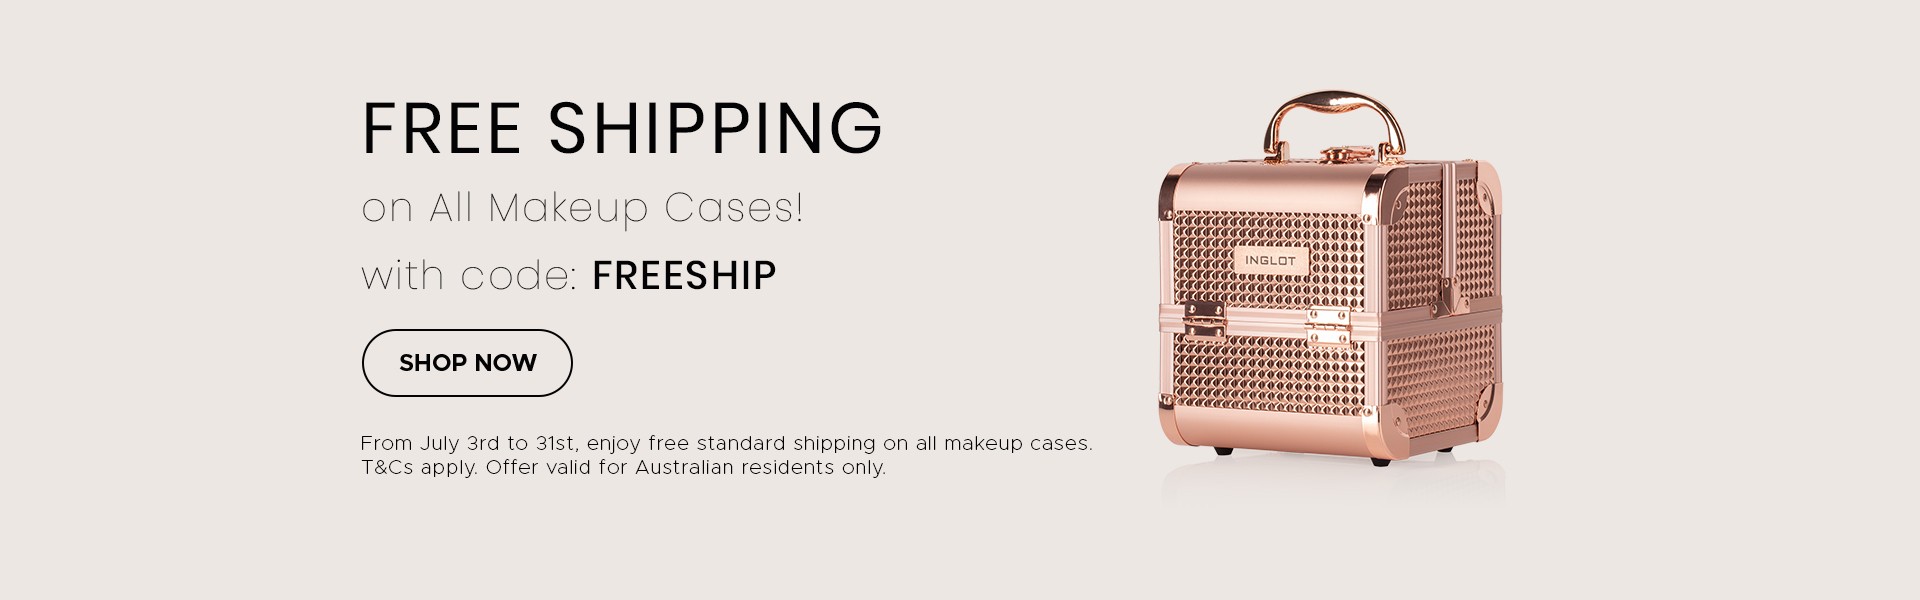 Free shipping on all makeup cases